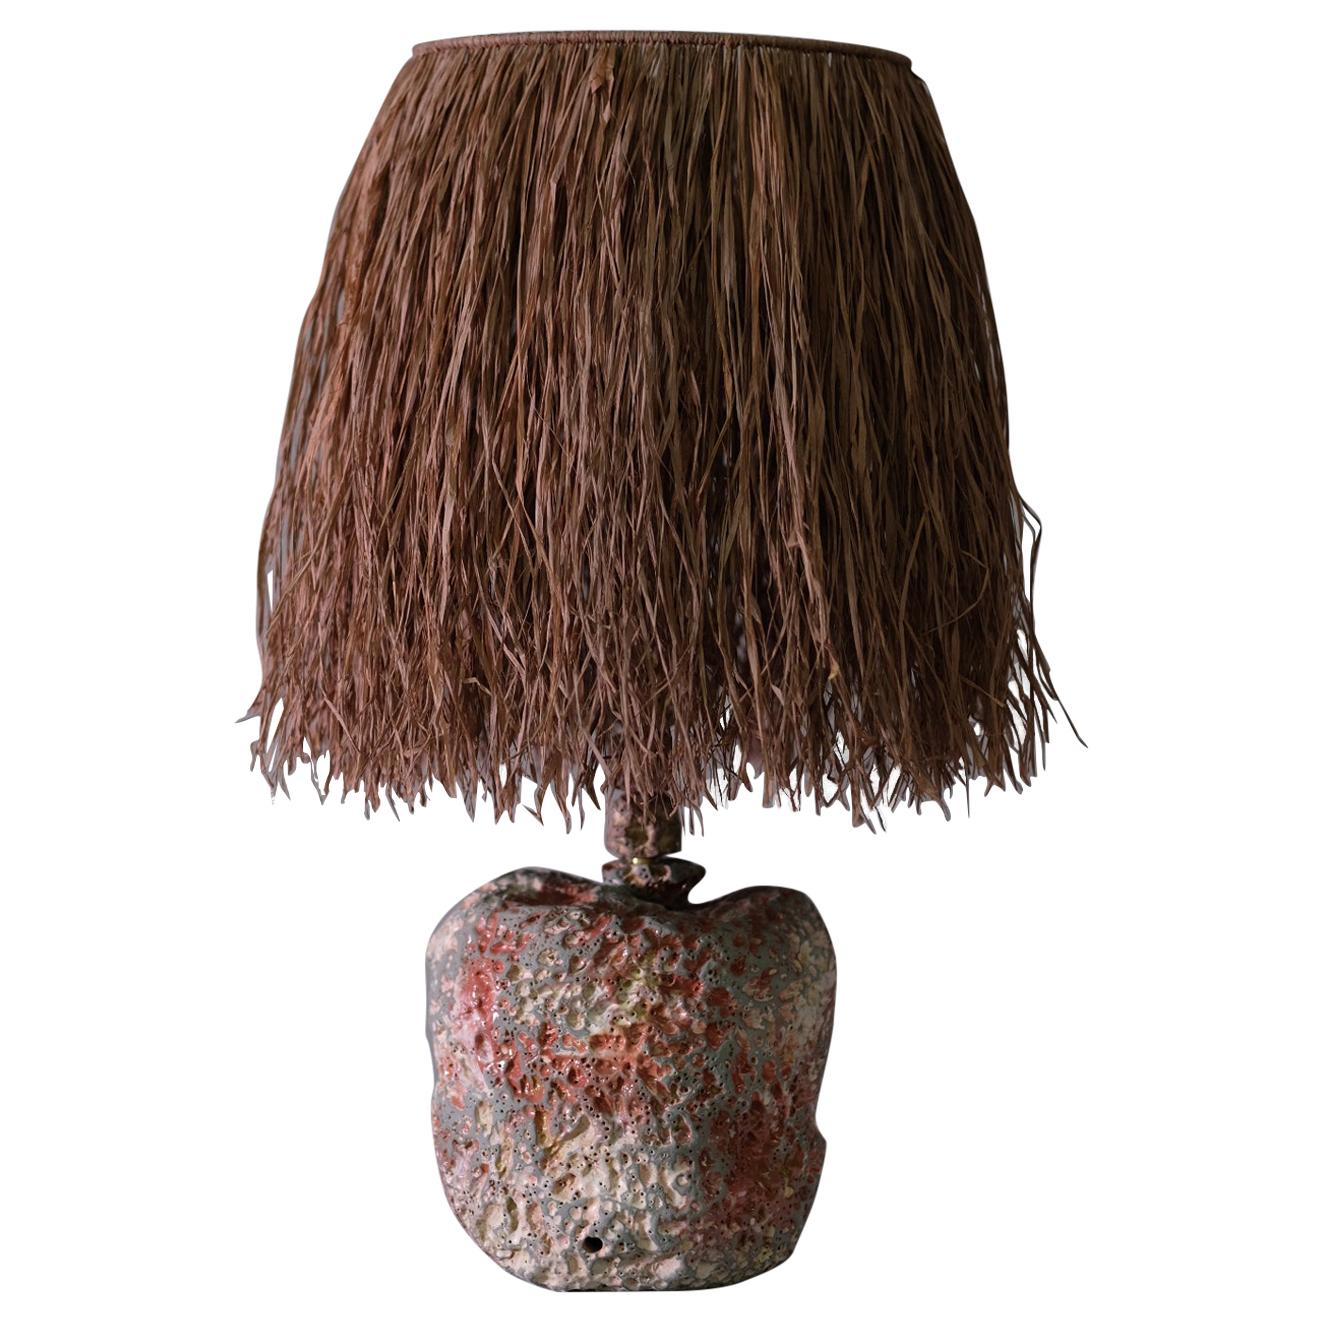 Hand Carved Stoneware Pacific Table Lamp with Raffia Shade by LGS Studio